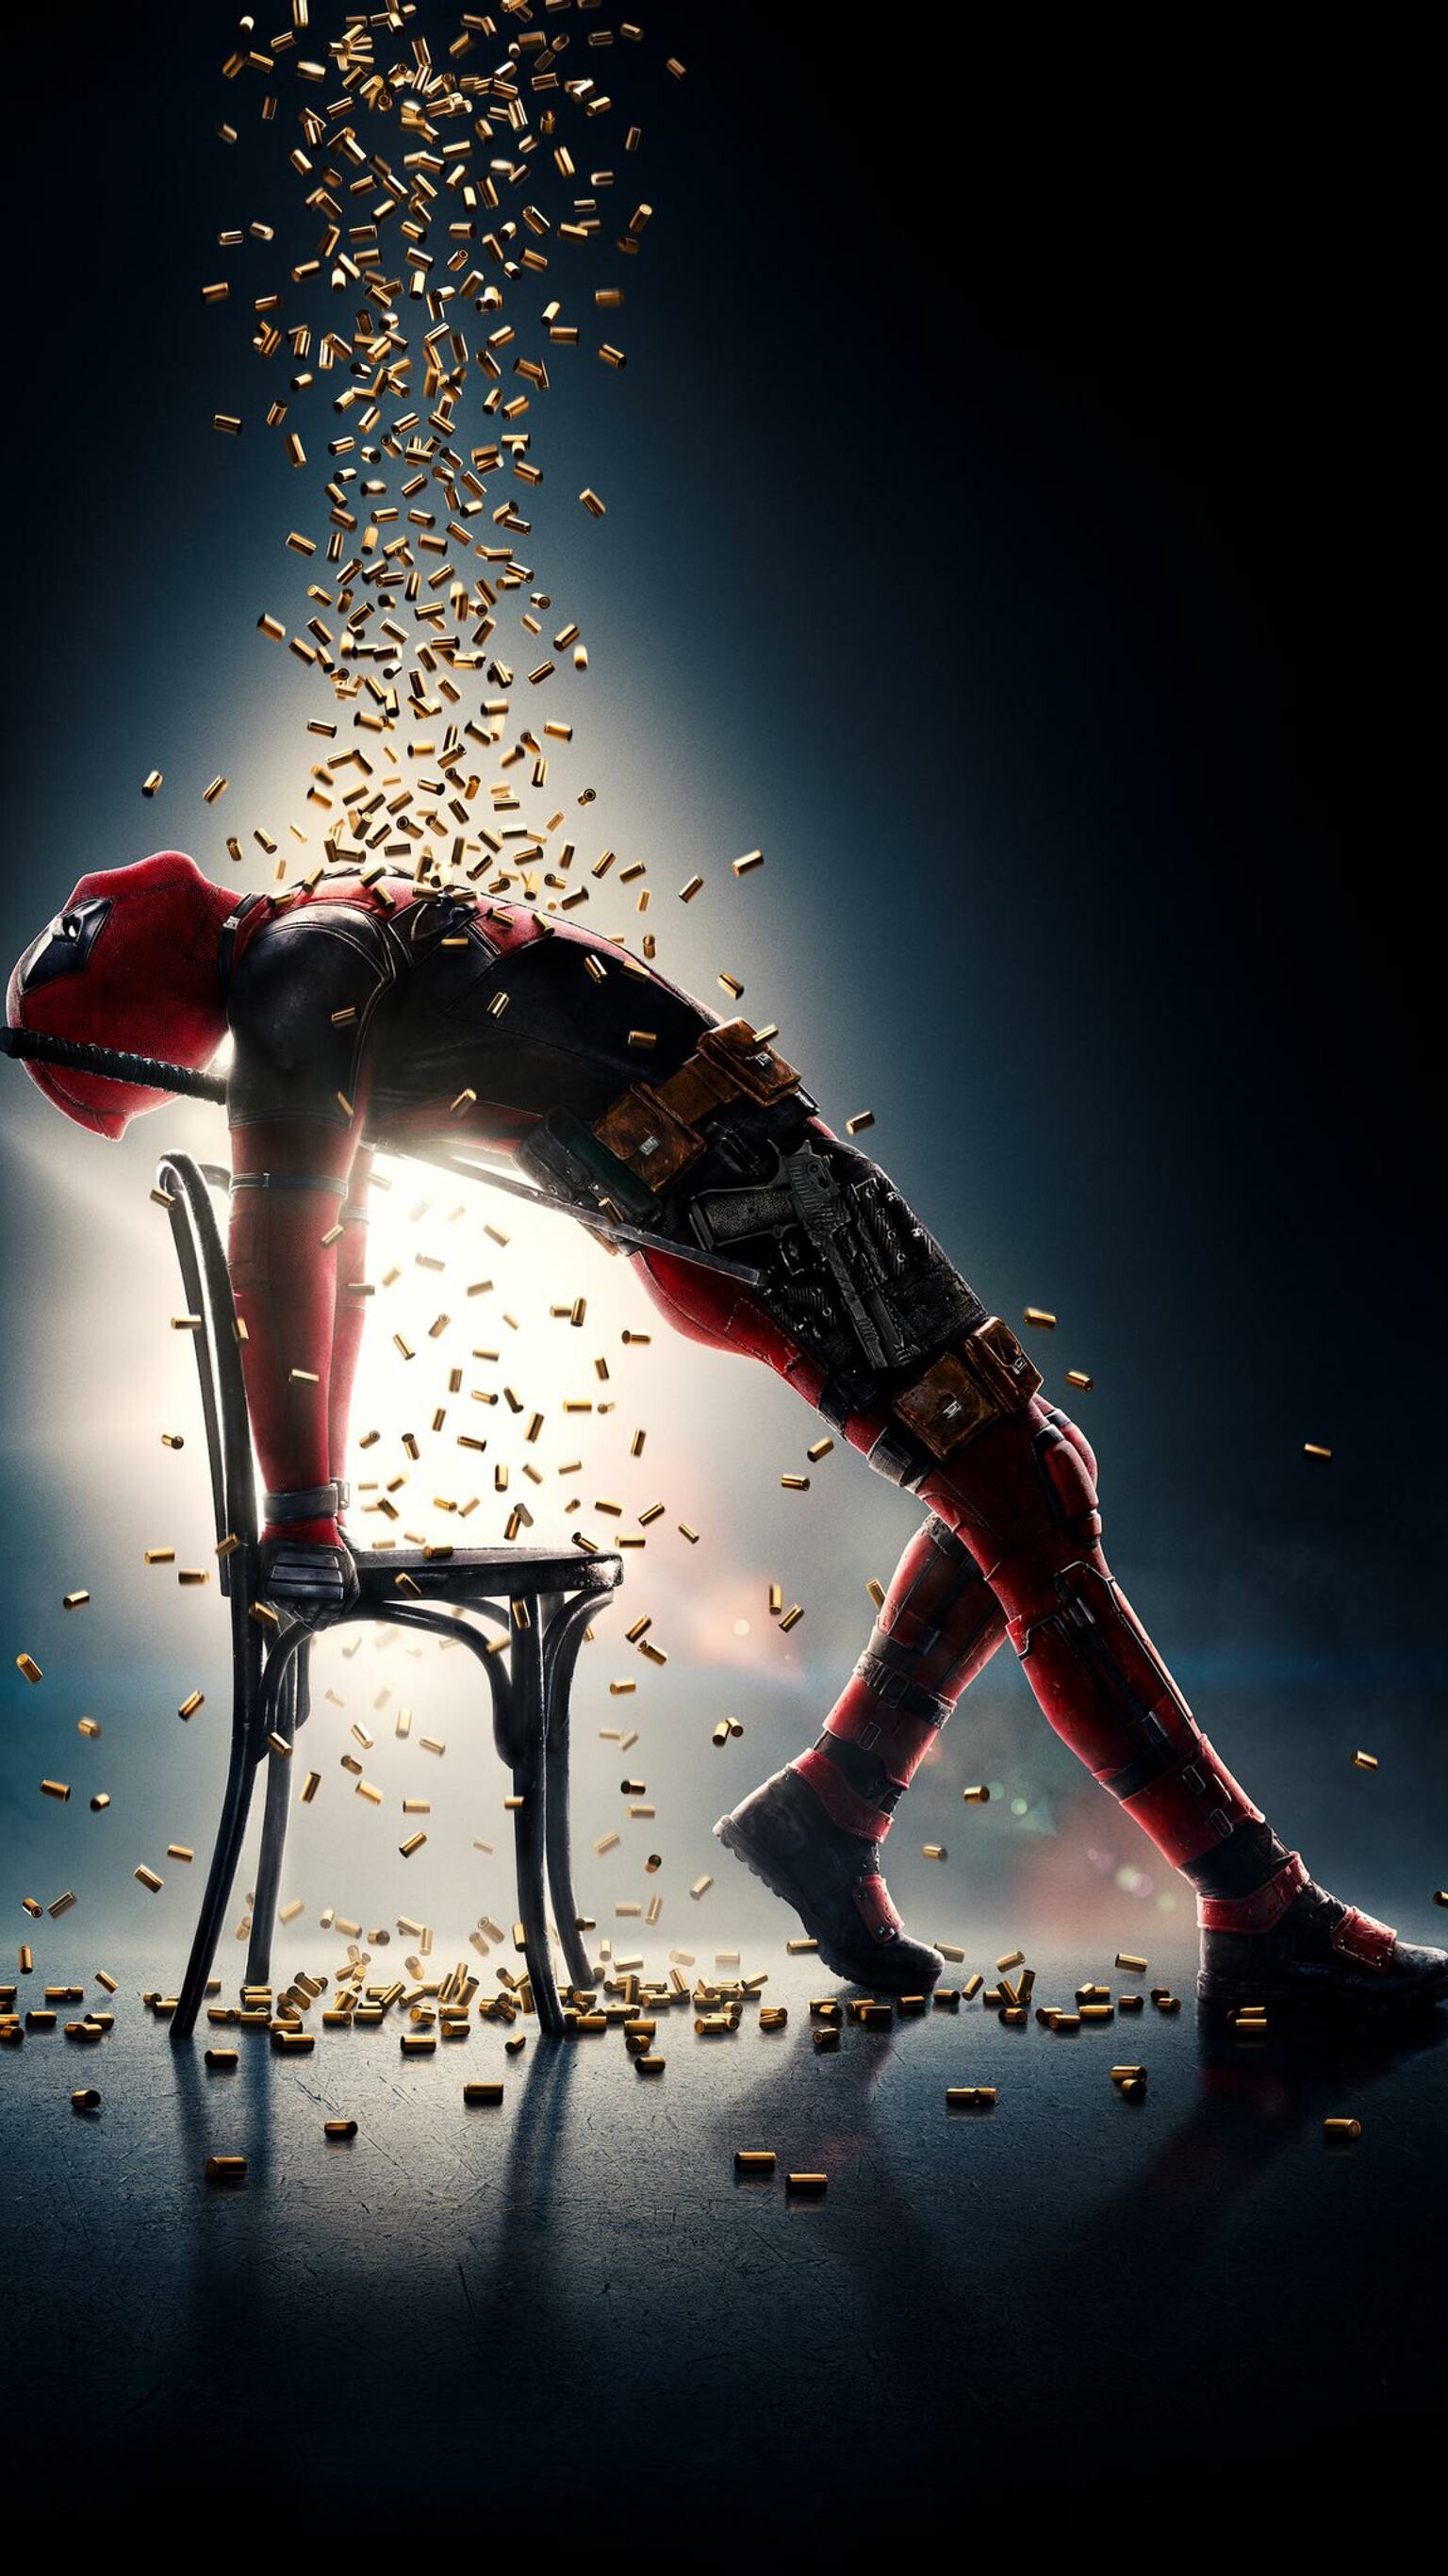 Deadpool: The film stars Ryan Reynolds in the title role alongside Morena Baccarin, Ed Skrein, T. J. Miller, and Gina Carano. 1540x2740 HD Wallpaper.